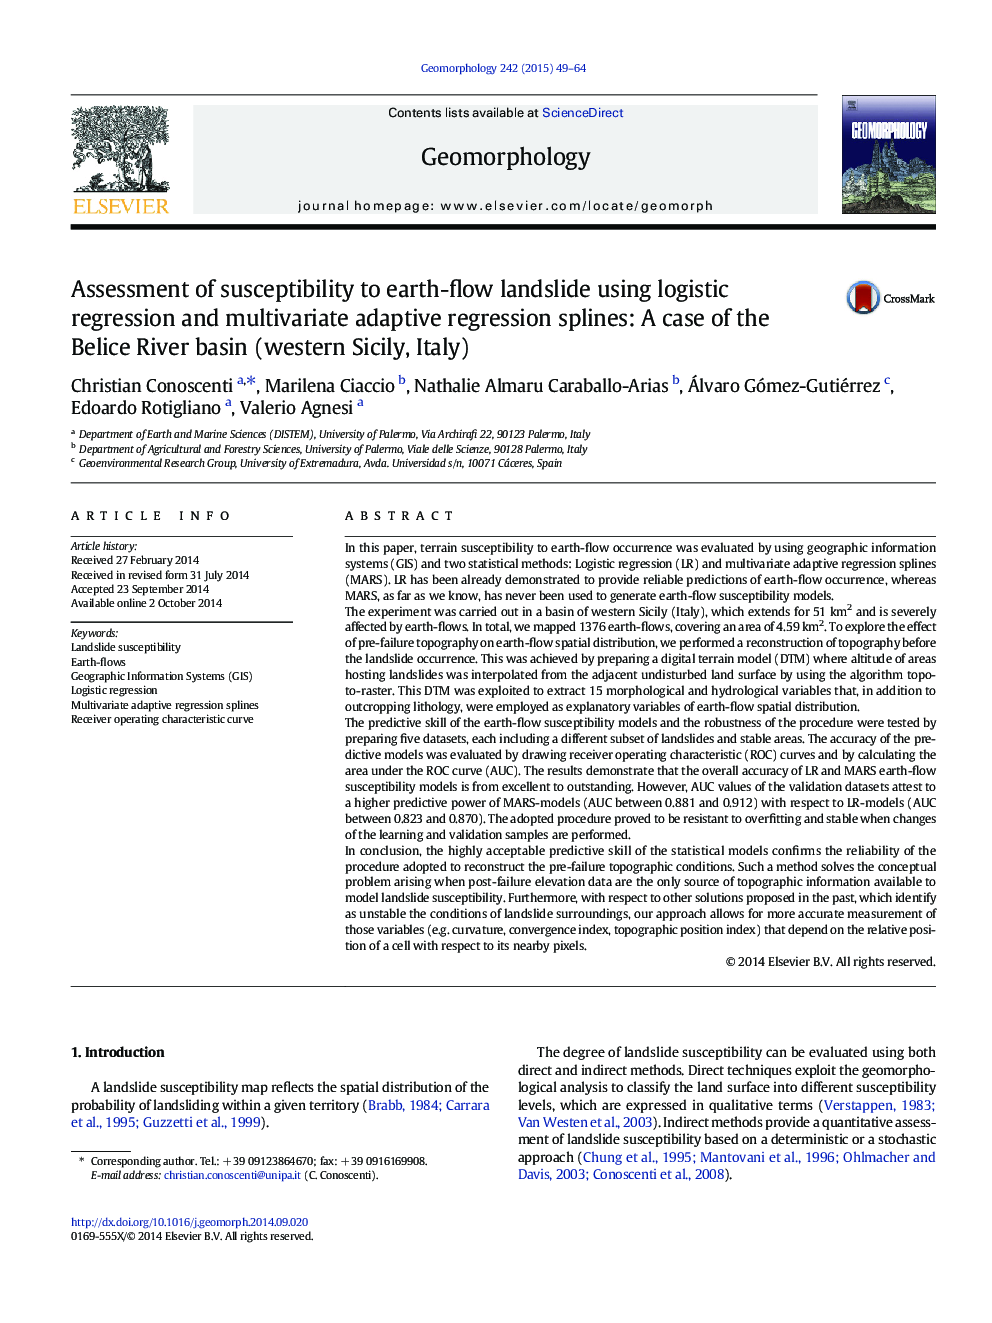 Assessment of susceptibility to earth-flow landslide using logistic regression and multivariate adaptive regression splines: A case of the Belice River basin (western Sicily, Italy)